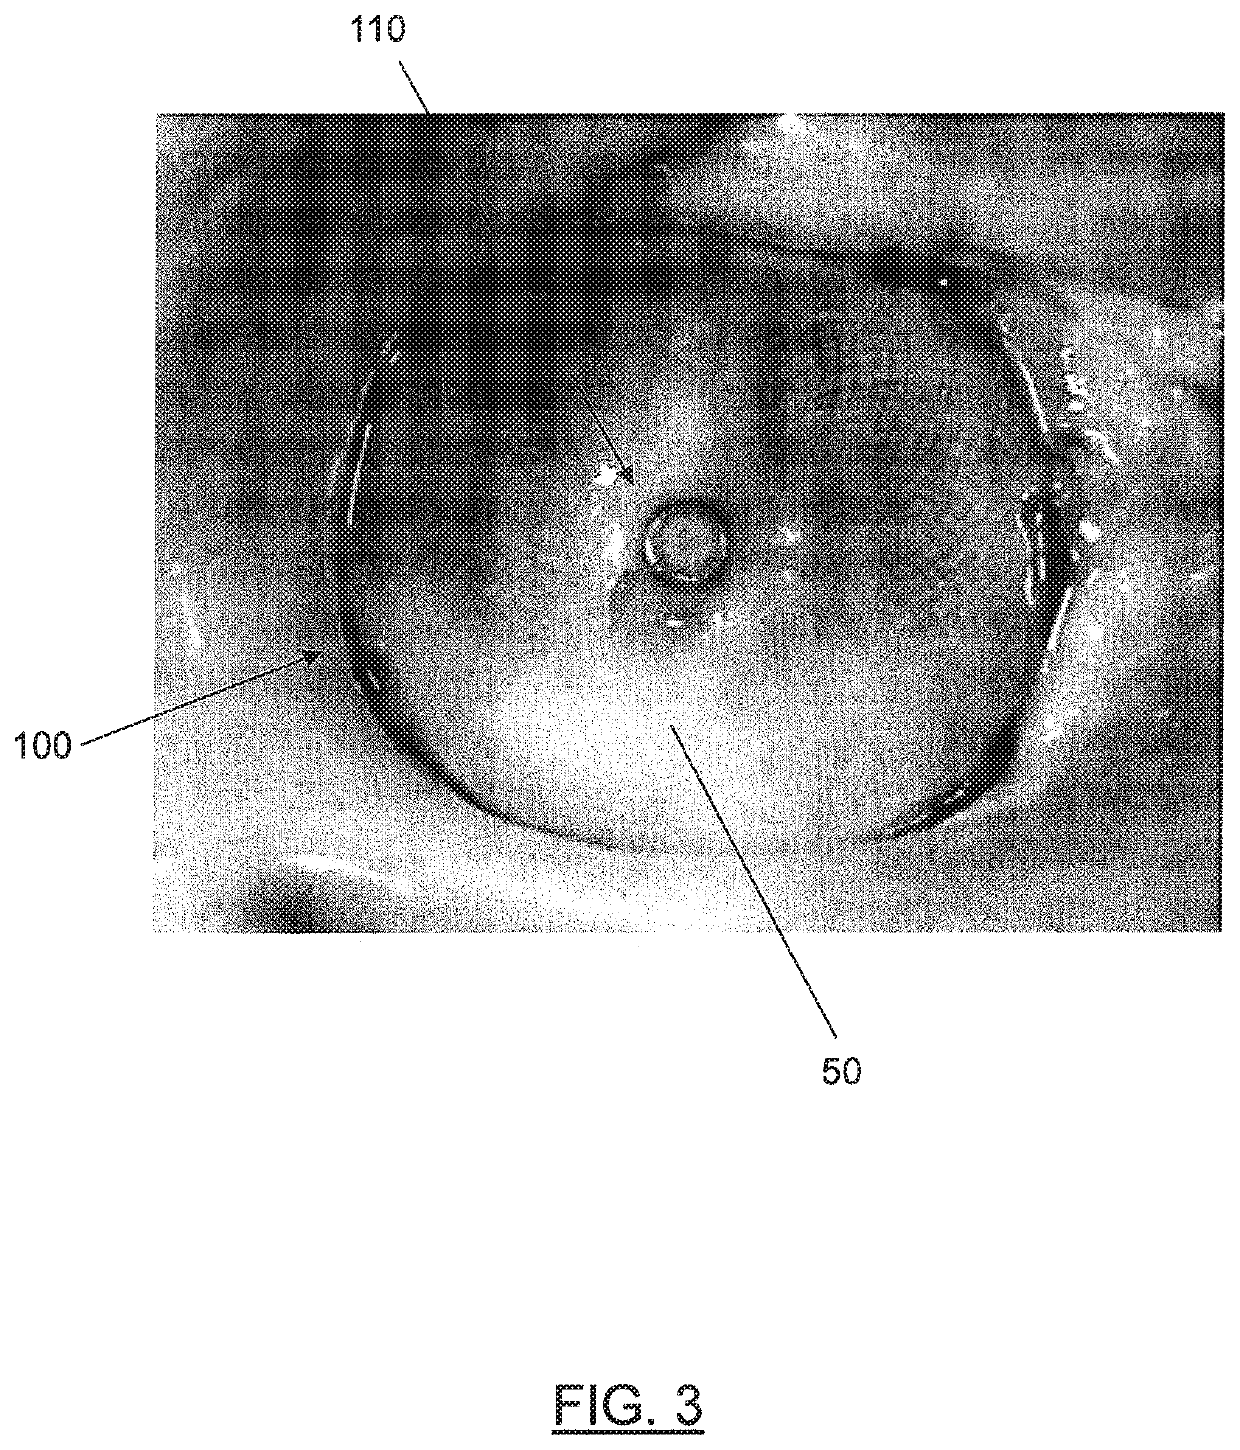 Percutaneous catheter directed intravascular occlusion devices with retractable stabilizing wires